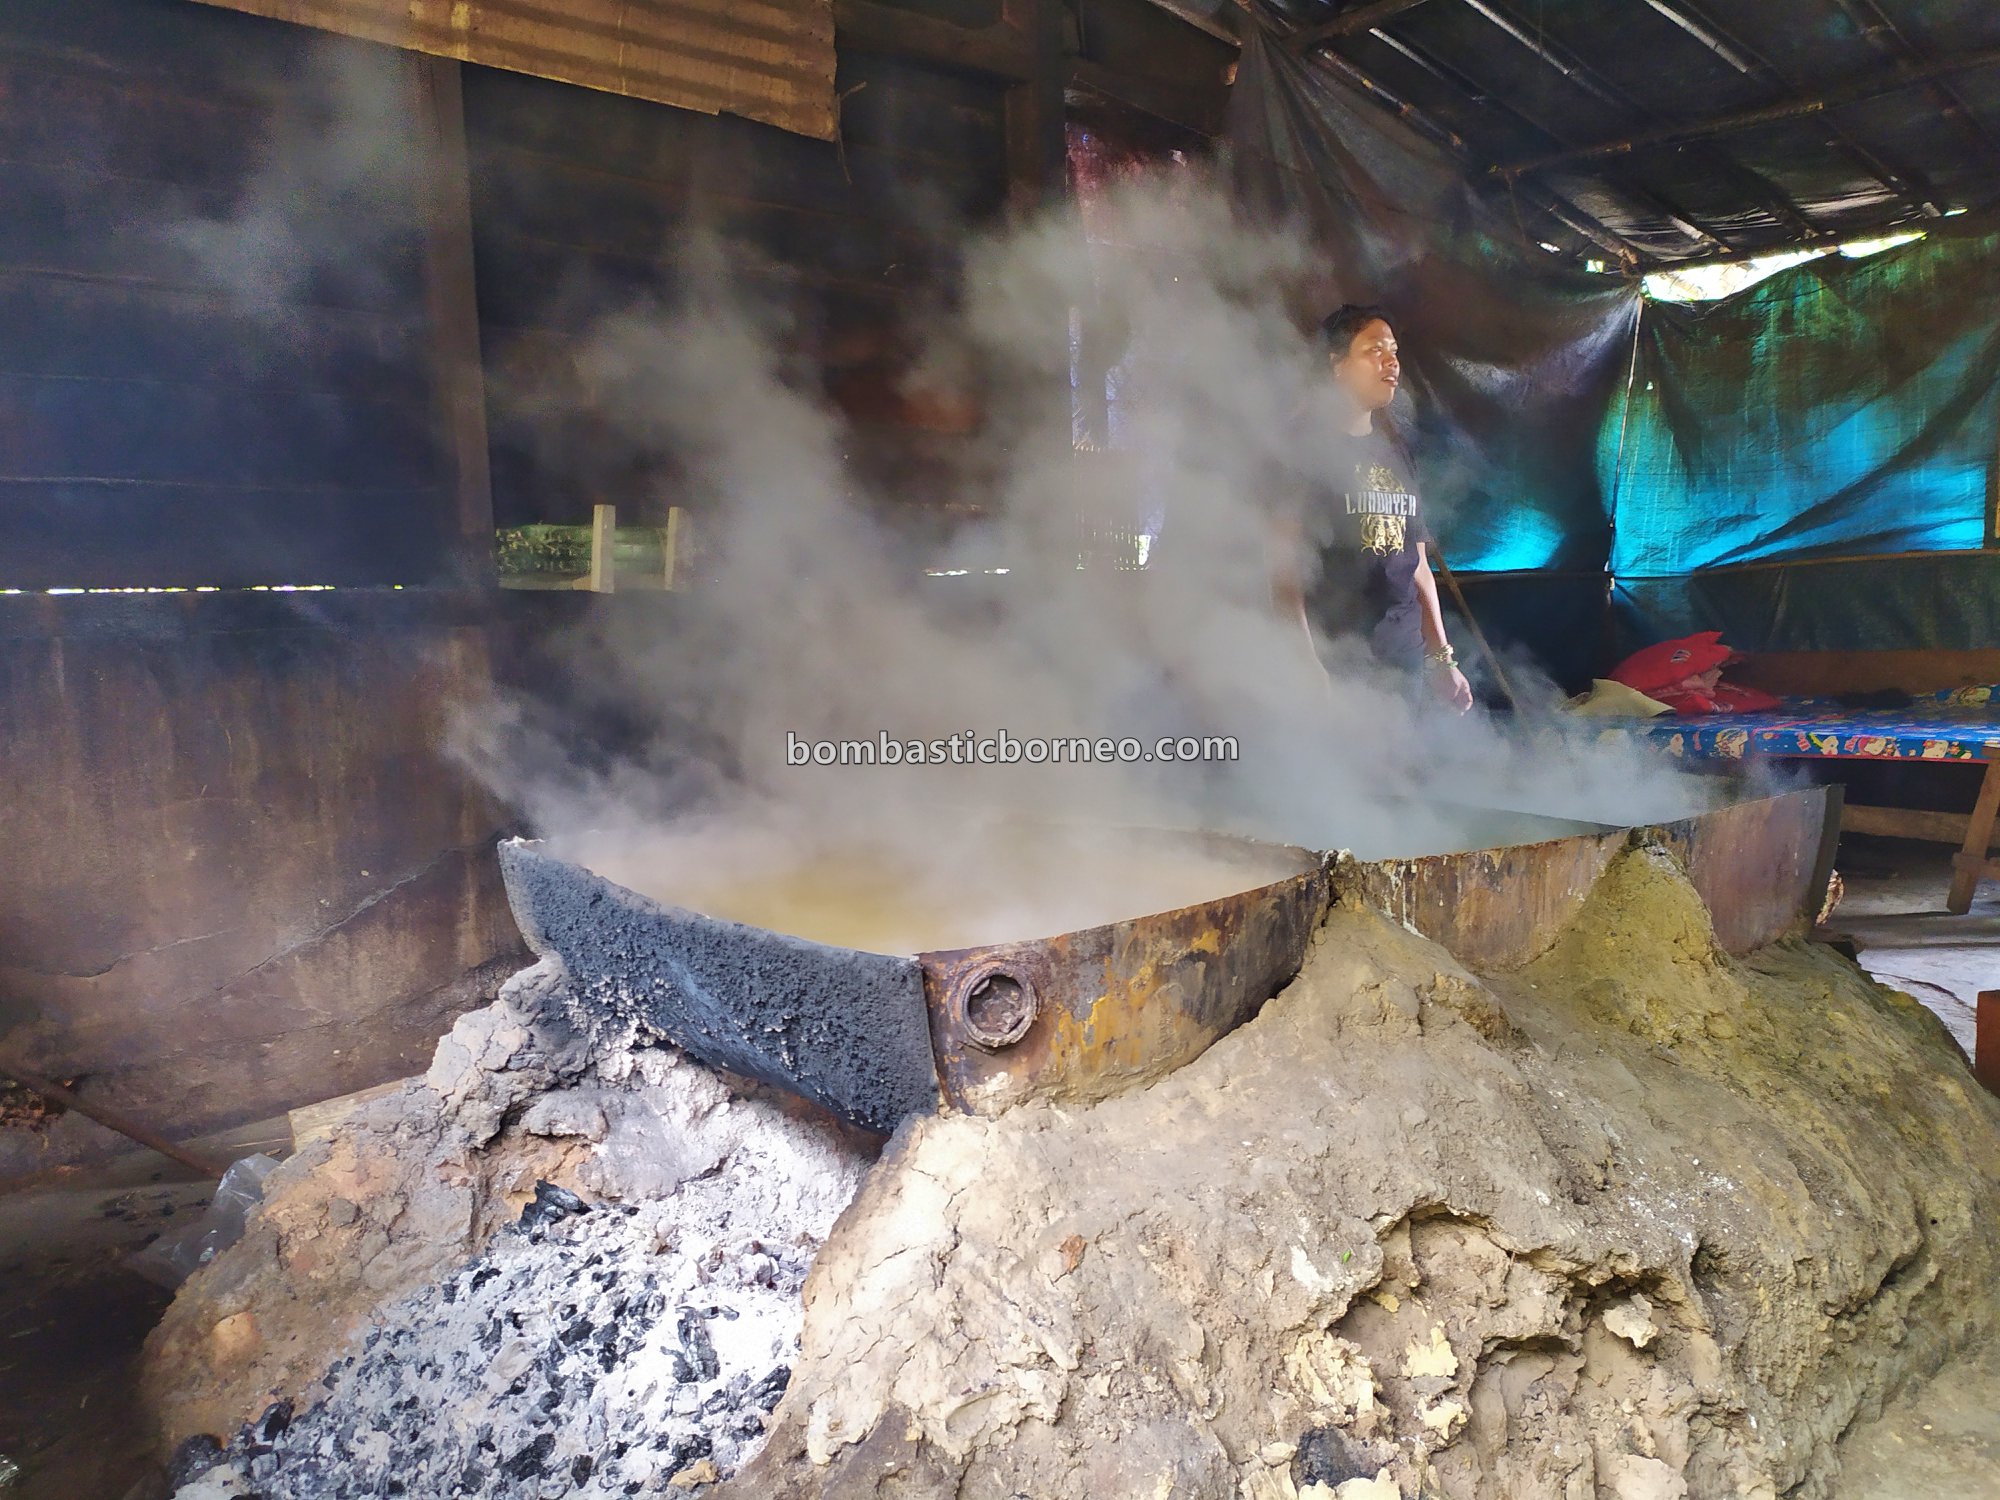 salt spring, Long Midang, authentic, traditional, exploration, Indonesia, Nunukan, Highlands, Tourism, tourist attraction, travel guide, Borneo, 探索婆罗洲游踪, 北加里曼丹高山盐, 印尼原住民部落